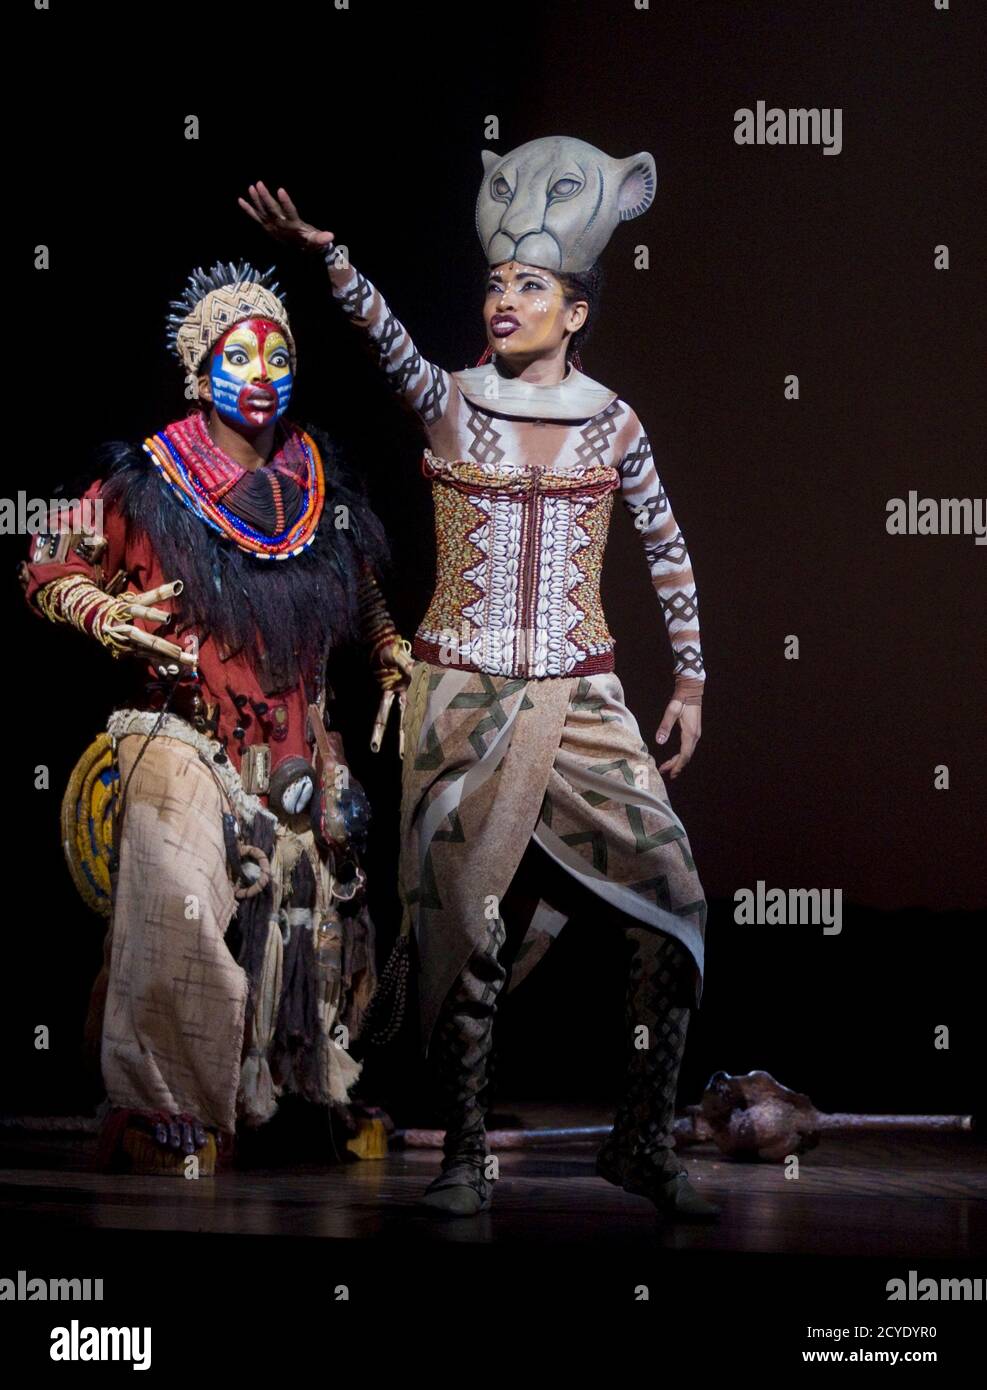 Actresses Daniela Pobega (R) dressed as "Nala" and Brenda Mhlongo dressed  as "Rafiki" perform during the press rehearsal of "El Rey Leon" ("The Lion  King") musical shows in Madrid October 13, 2011.